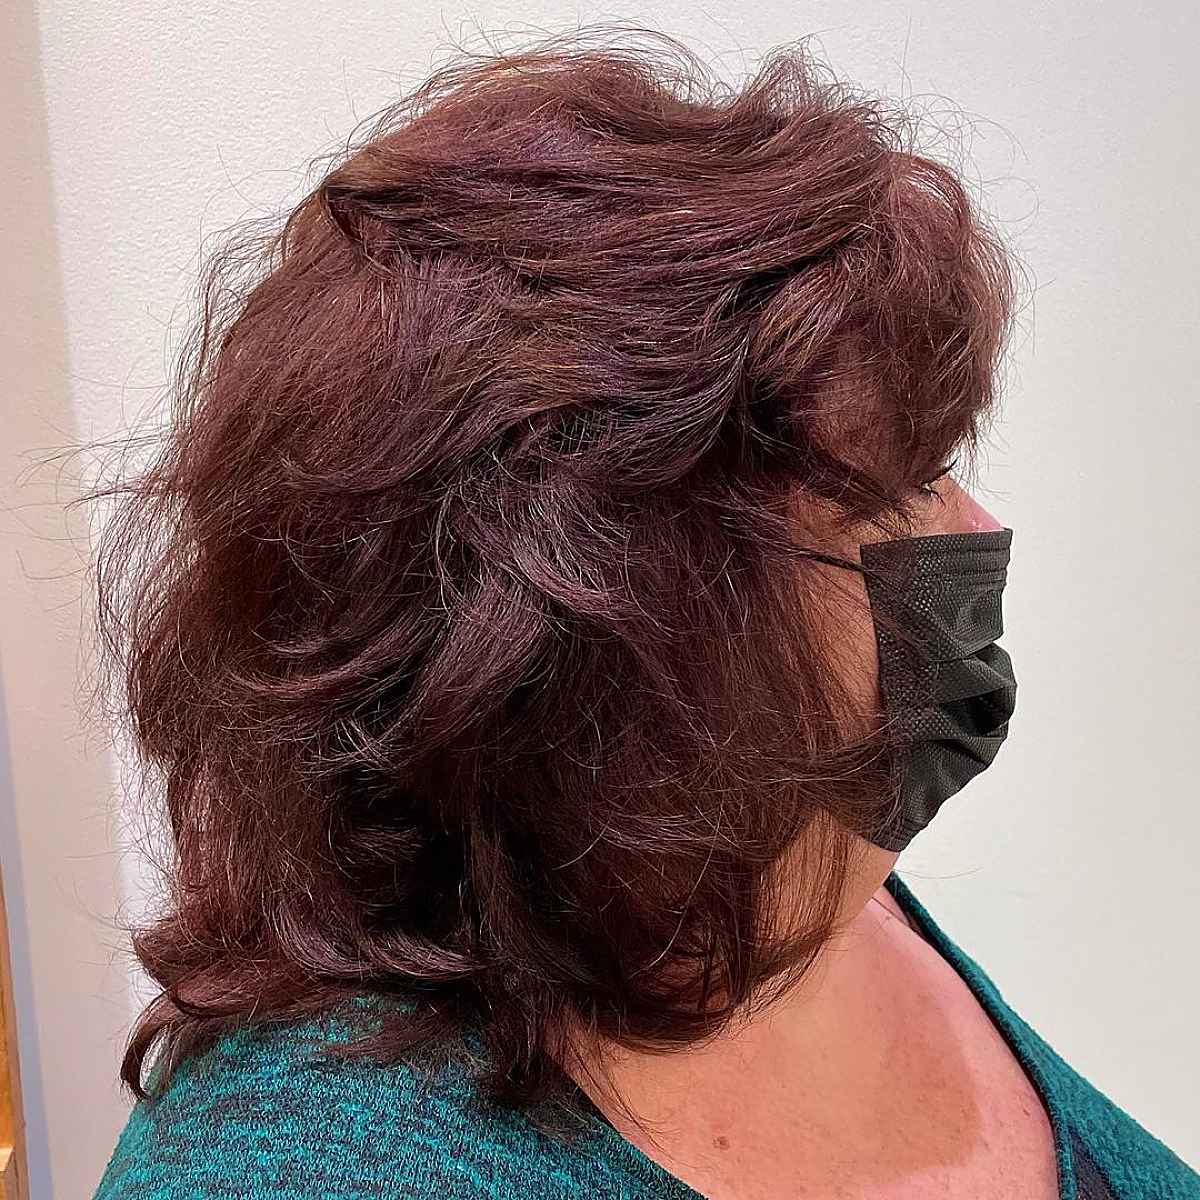 Top 15 Fall Hair Colors for Women Over 50 in 2021